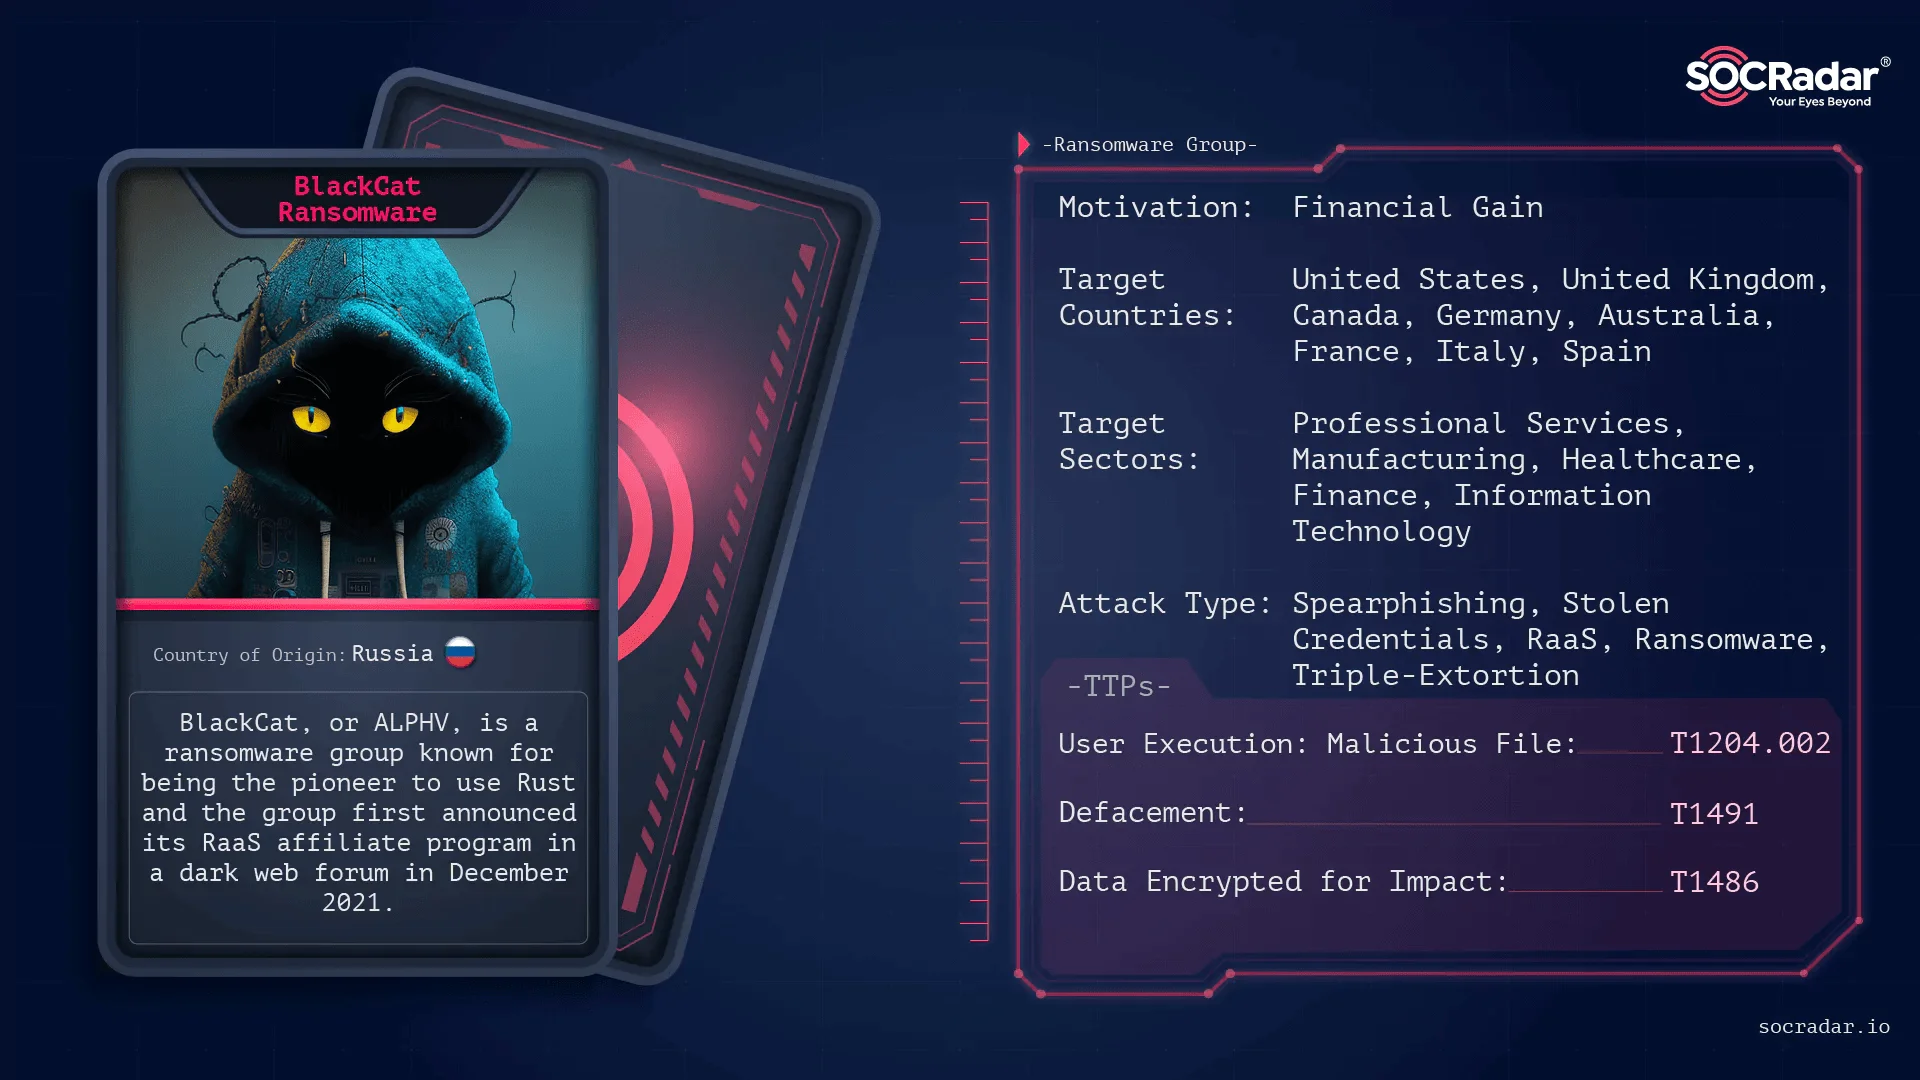 Threat Actor Card of ALPHV BlackCat Ransomware Group